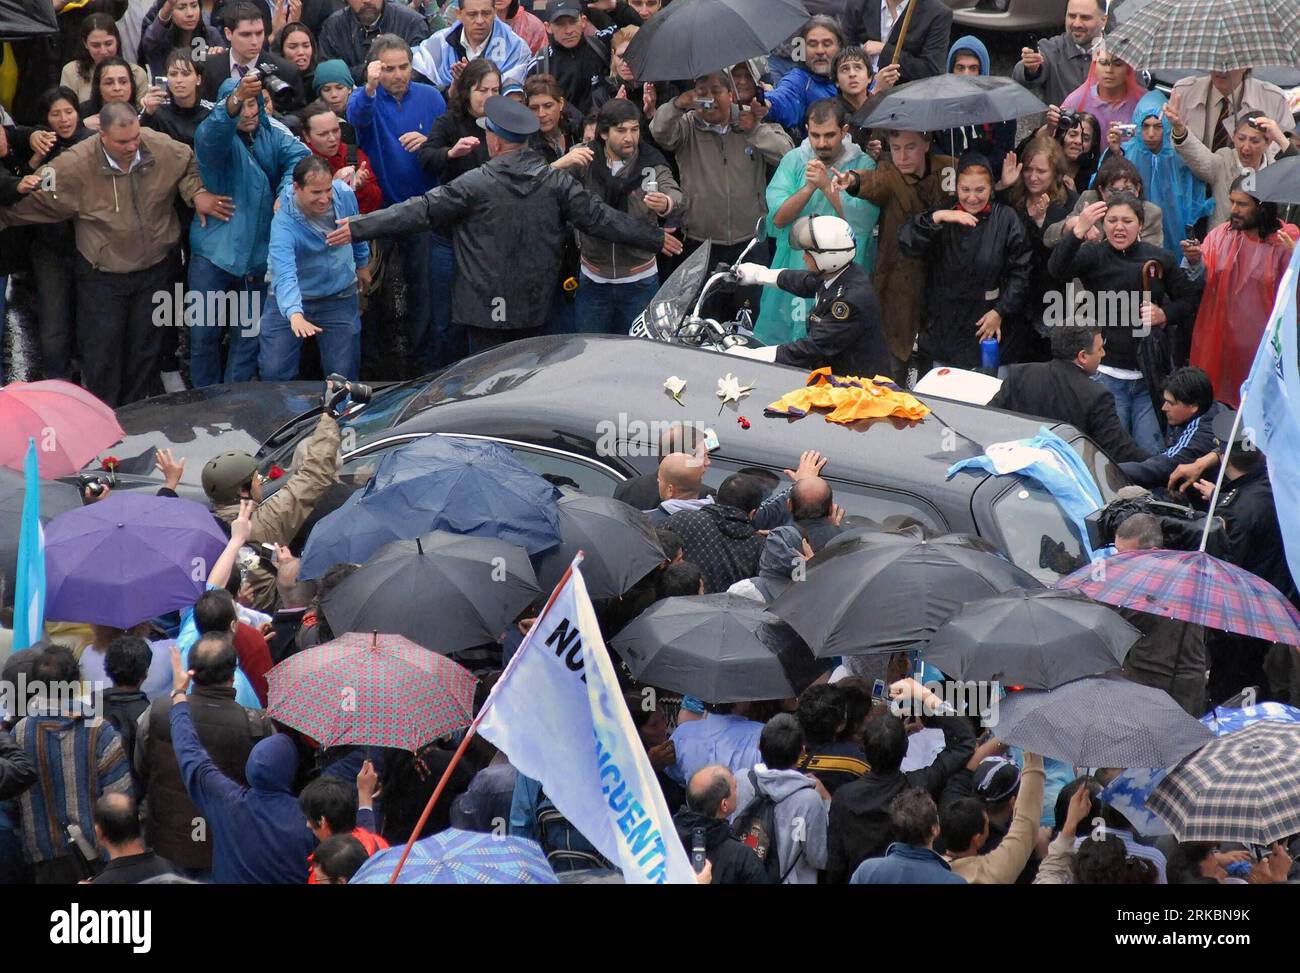 Bildnummer: 54585405  Datum: 29.10.2010  Copyright: imago/Xinhua (101029) --  BUENOS AIRES, Oct. 29, 2010 (Xinhua) -- pay respect to the hearse which carries the remains of former Argentine President Nestor Kirchner from the Casa Rosada Presidential Palace to a local airport for a flight to his home El Calafate, Province of Santa Cruz, where he will be buried in his family cemetery, Oct. 29, 2010. (Xinhua/Leonardo Zavattaro/Telam) ARGENTINA-BUENOS AIRES-KIRCHNER-FUNERAL PUBLICATIONxNOTxINxCHN People Politik Beerdigung Trauer Kirchner premiumd kbdig xcb 2010 quer    Bildnummer 54585405 Date 29 Stock Photo